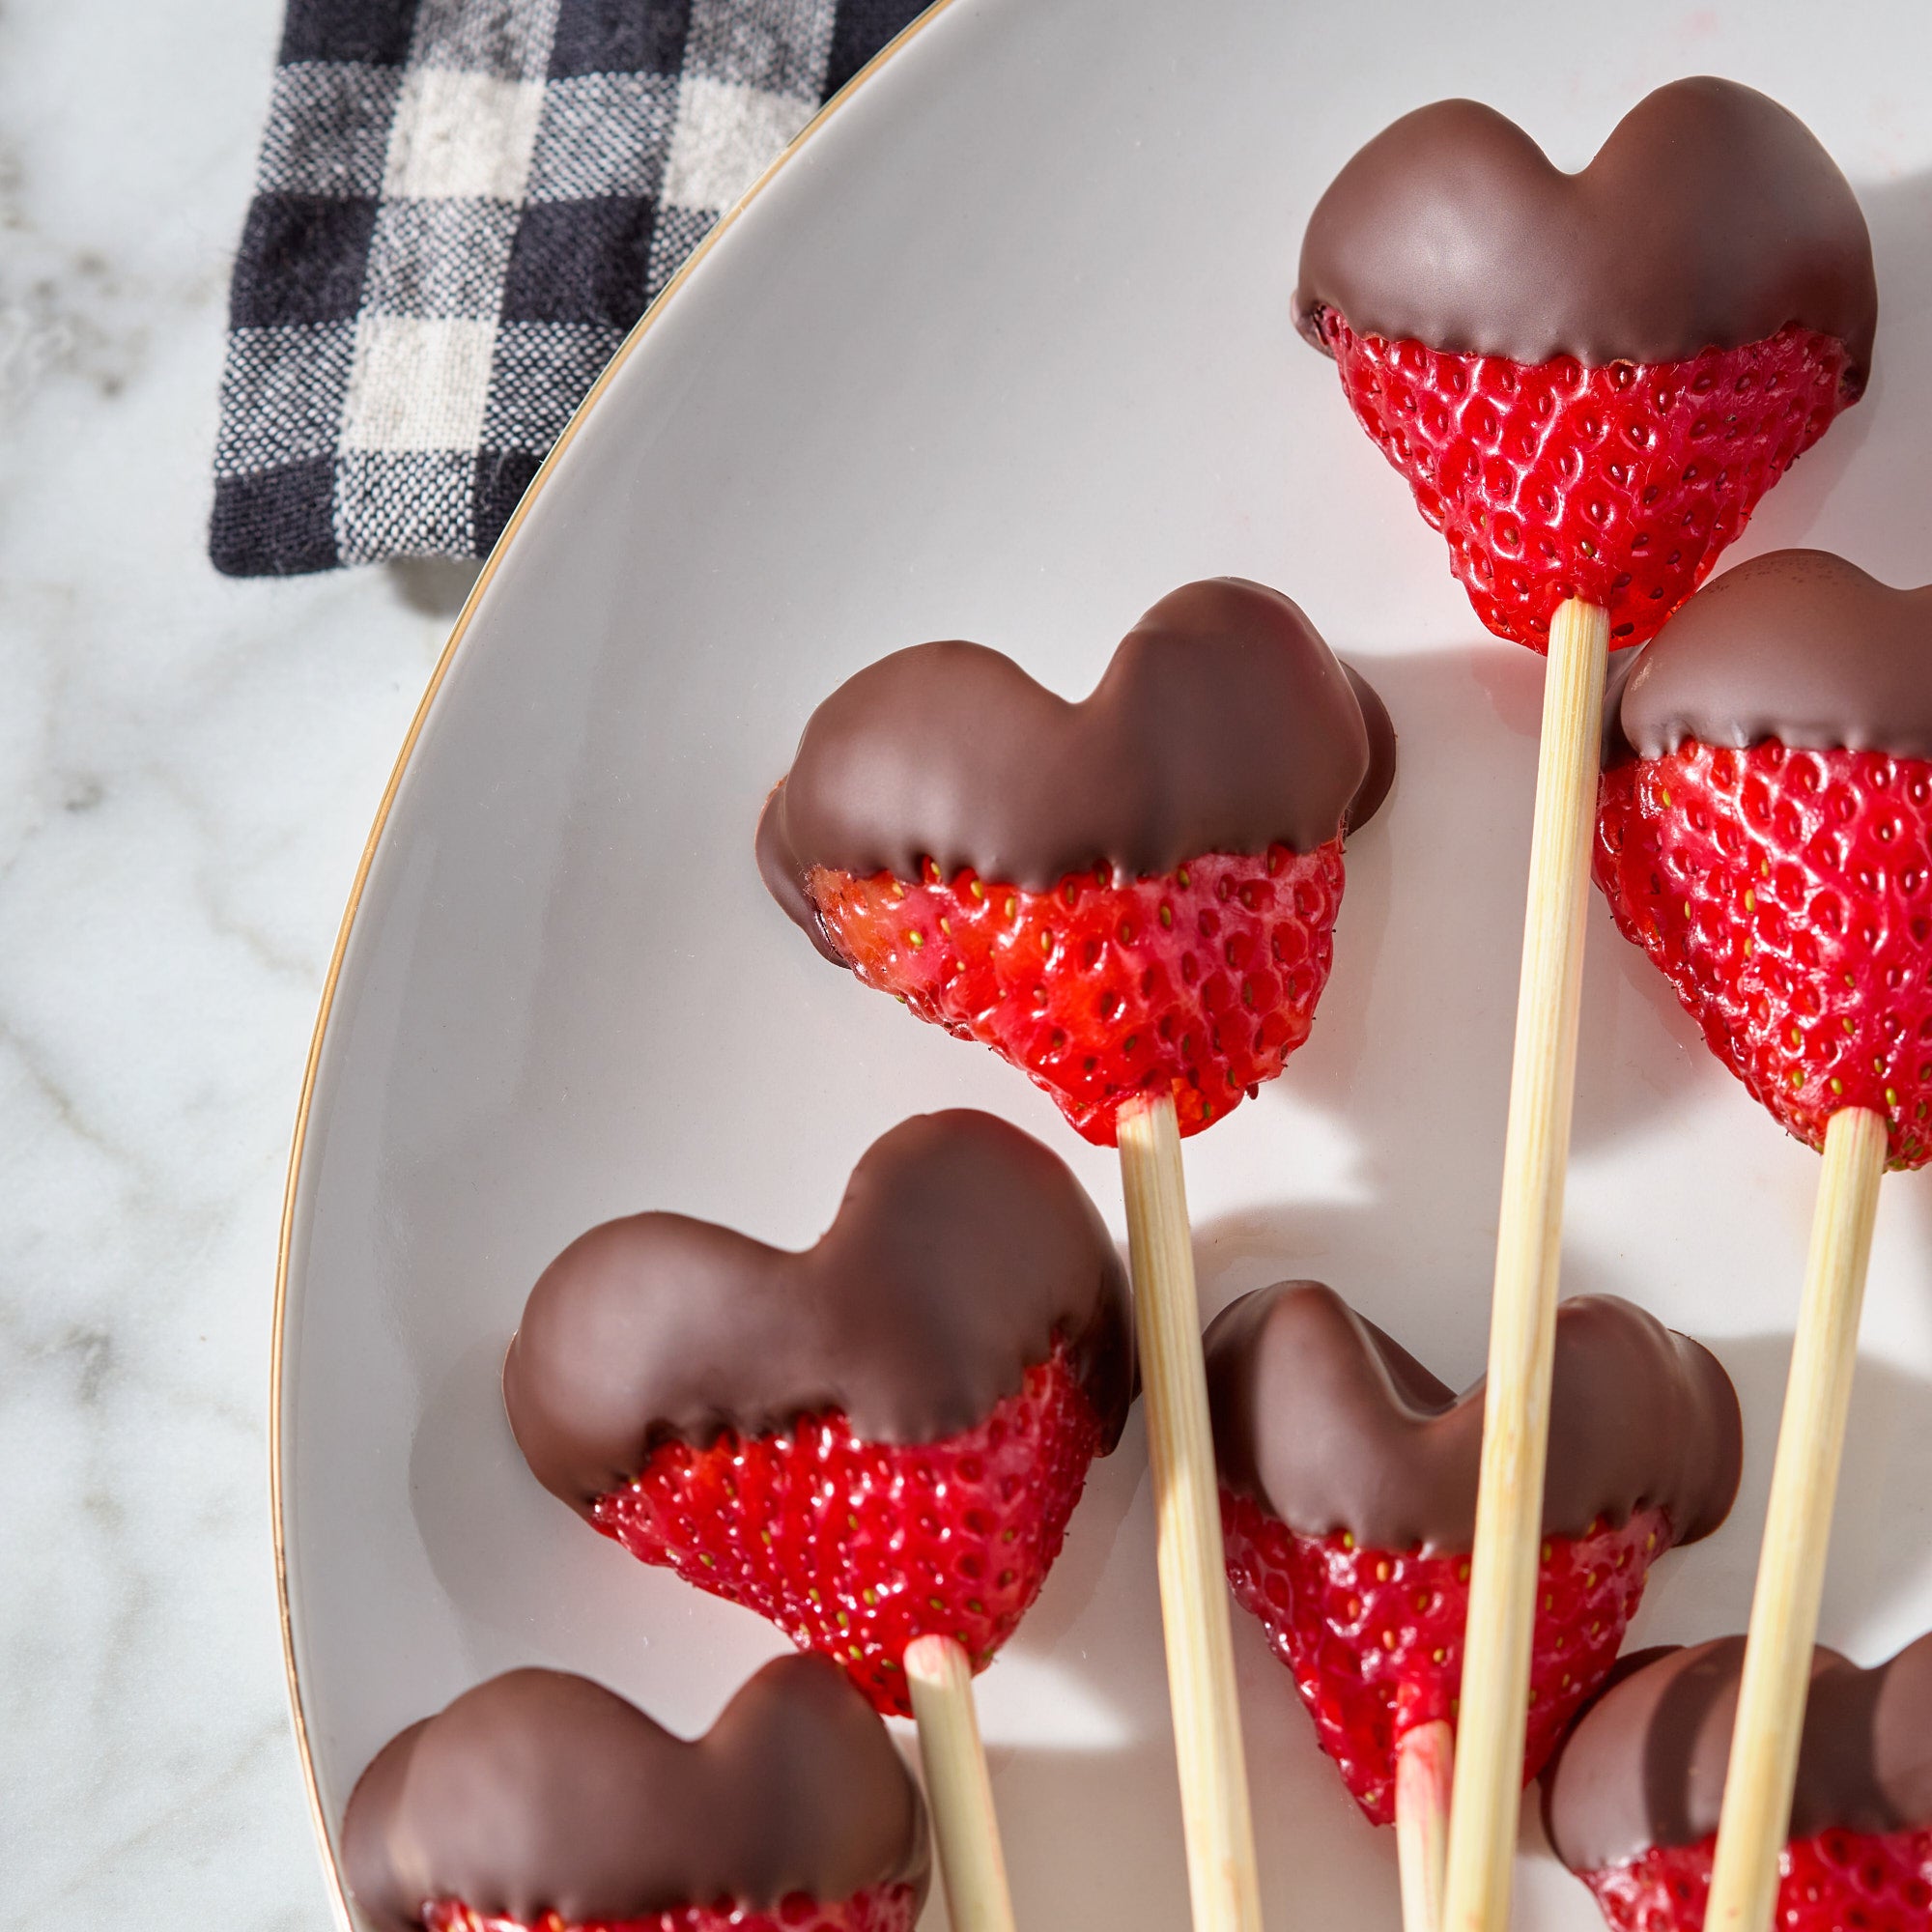 Share the Love with Sweet Strawberry Hearts